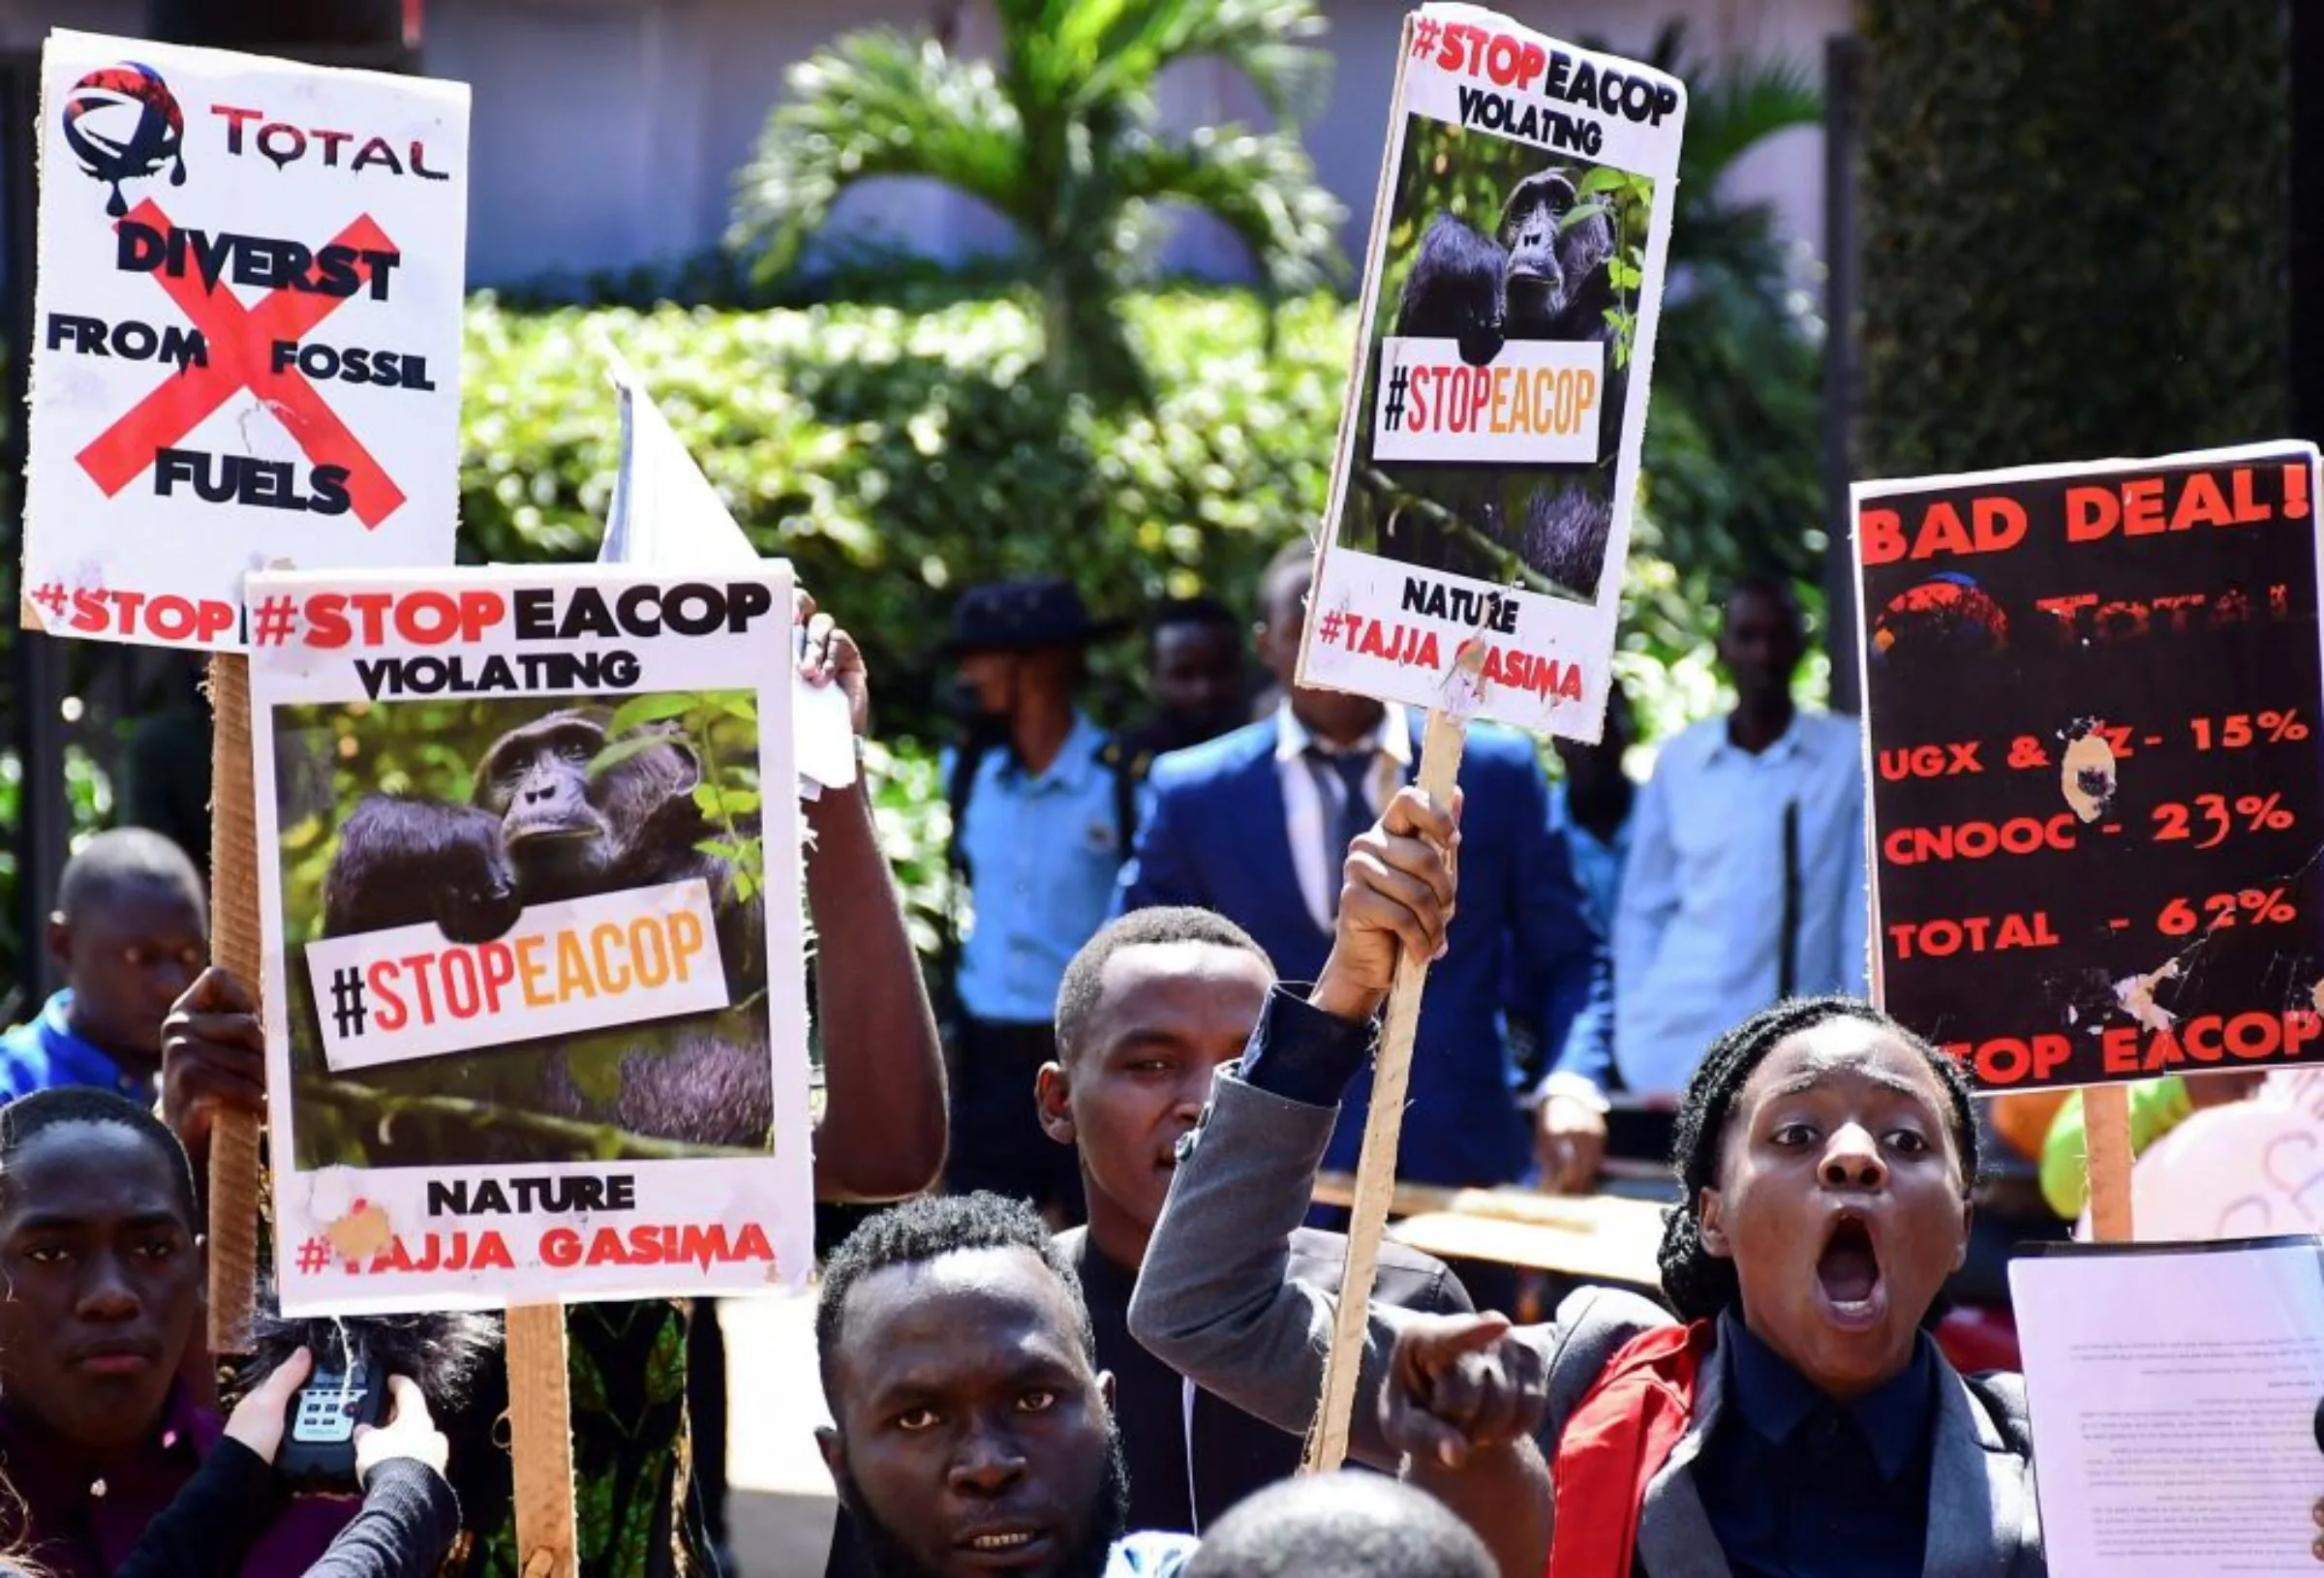 Ugandan activists march in support of the European Parliament resolution to stop the construction of the East African Crude Oil Pipeline, on environmental basis, near the European Union offices in Kampala, Uganda October 4, 2022